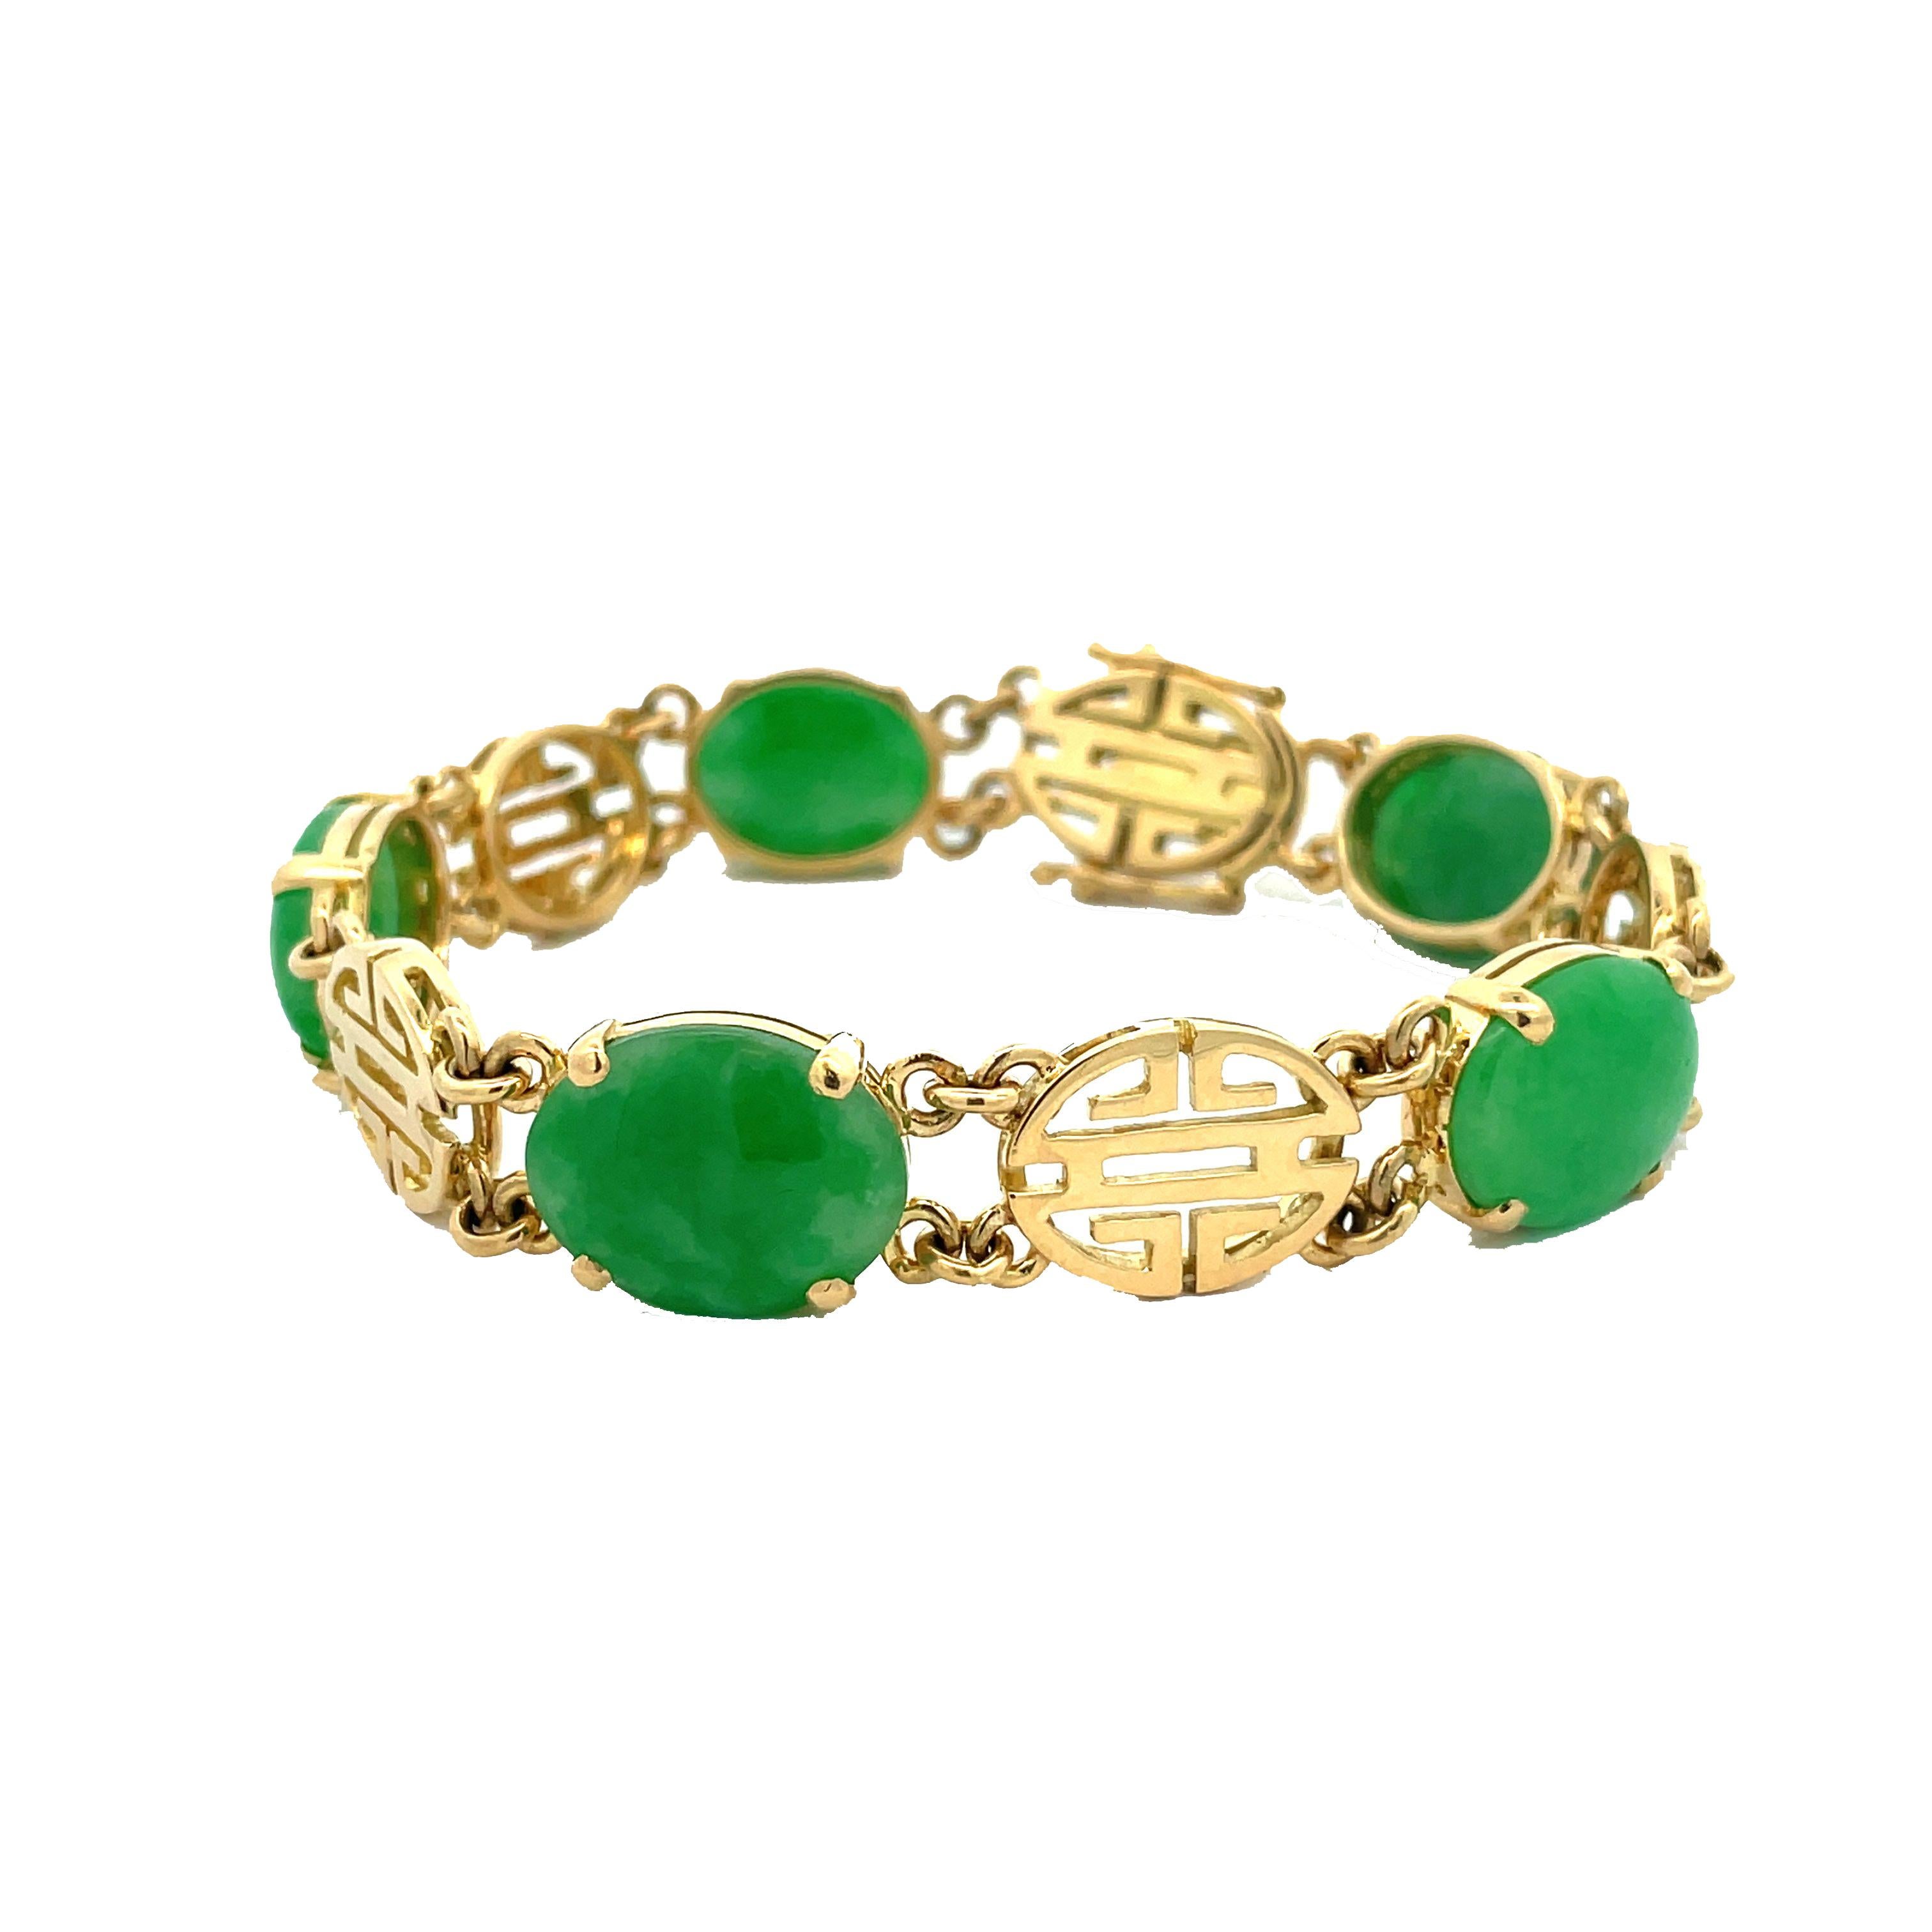 Lot - Jade Bracelet with 14K Gold Clasp and Hardware 585